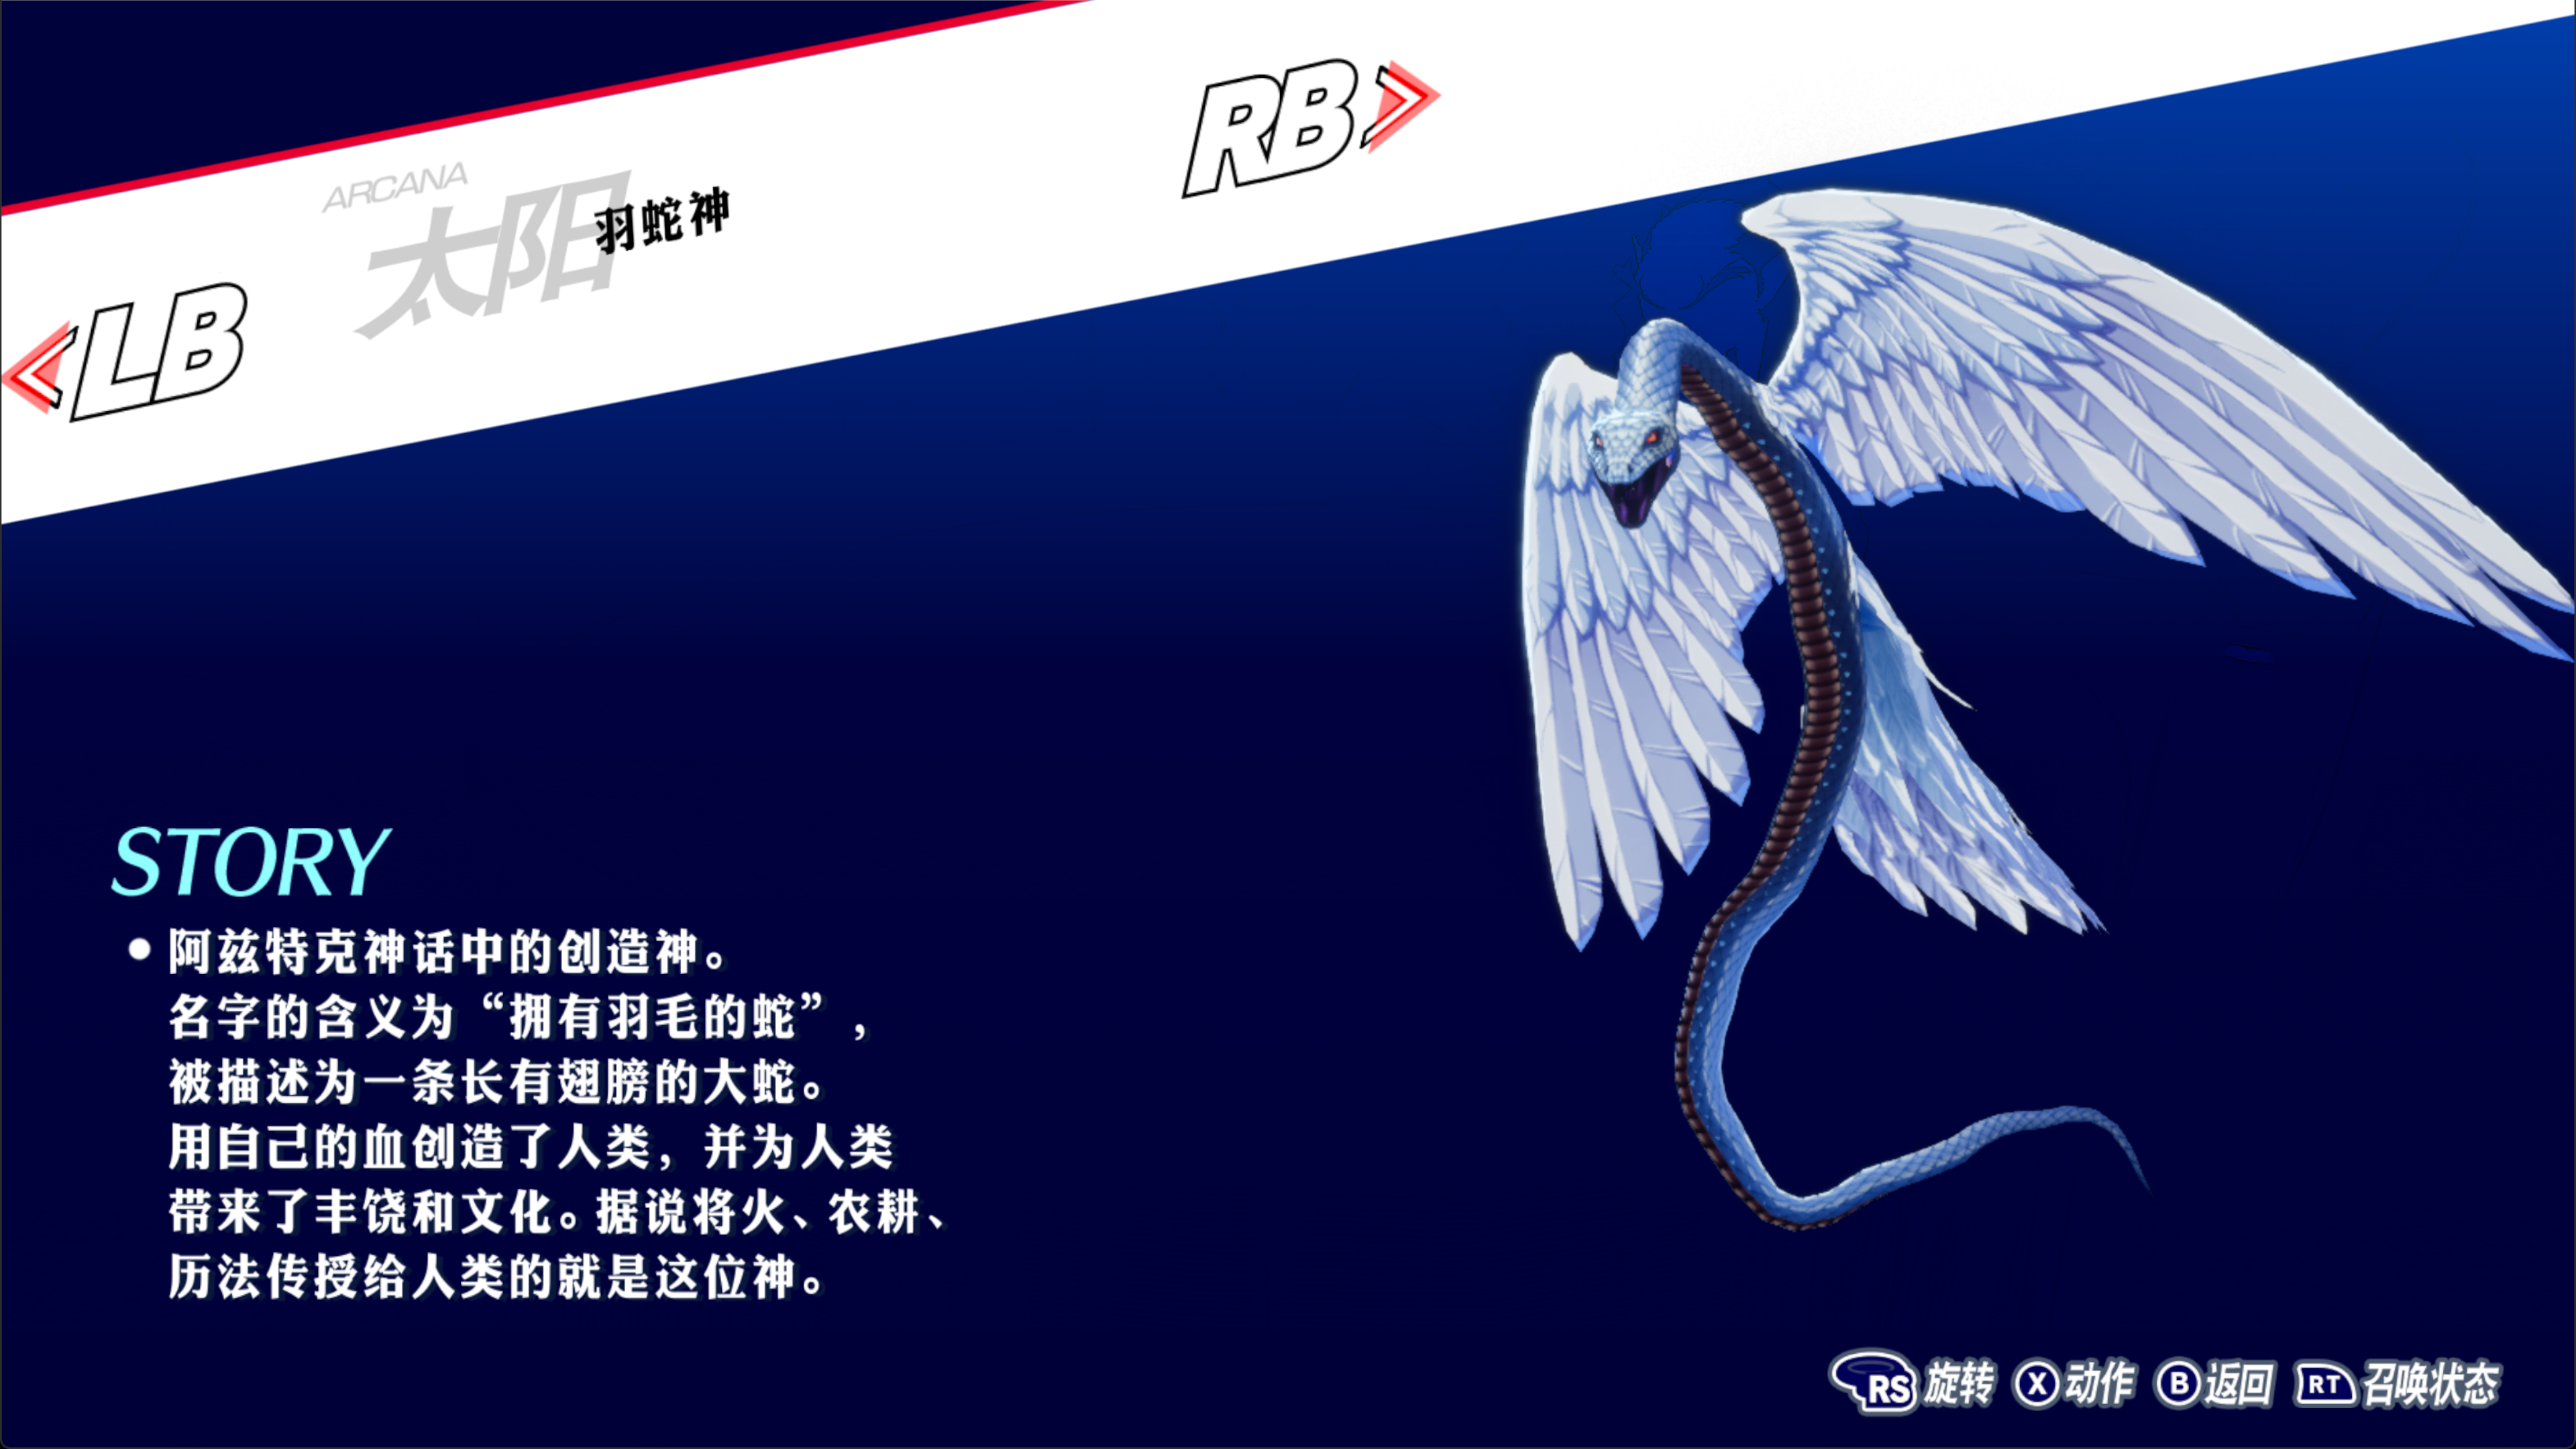 P3R 羽蛇神图鉴.png